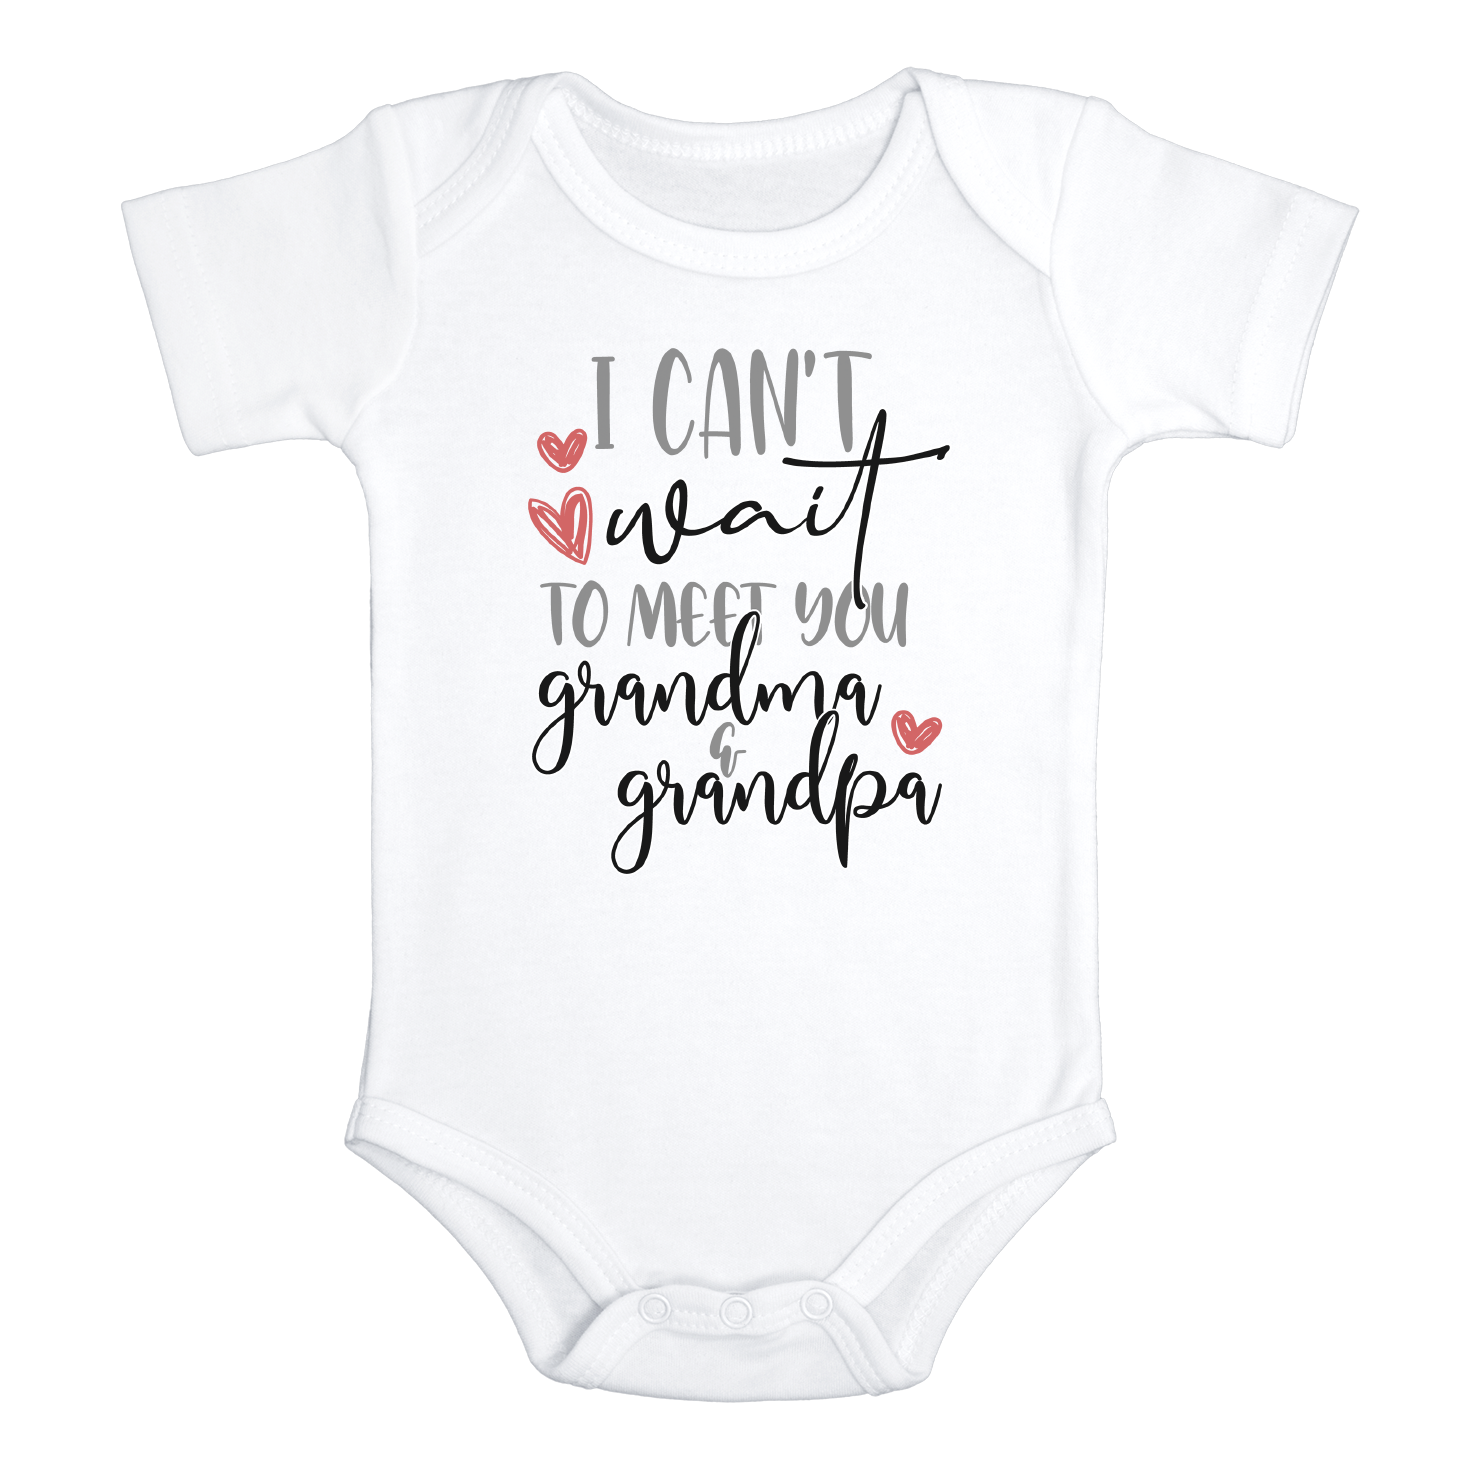 I CAN'T WAIT TO MEET YOU GRANDMA AND GRANDPA baby onesies bodysuit (white: short or long sleeve)